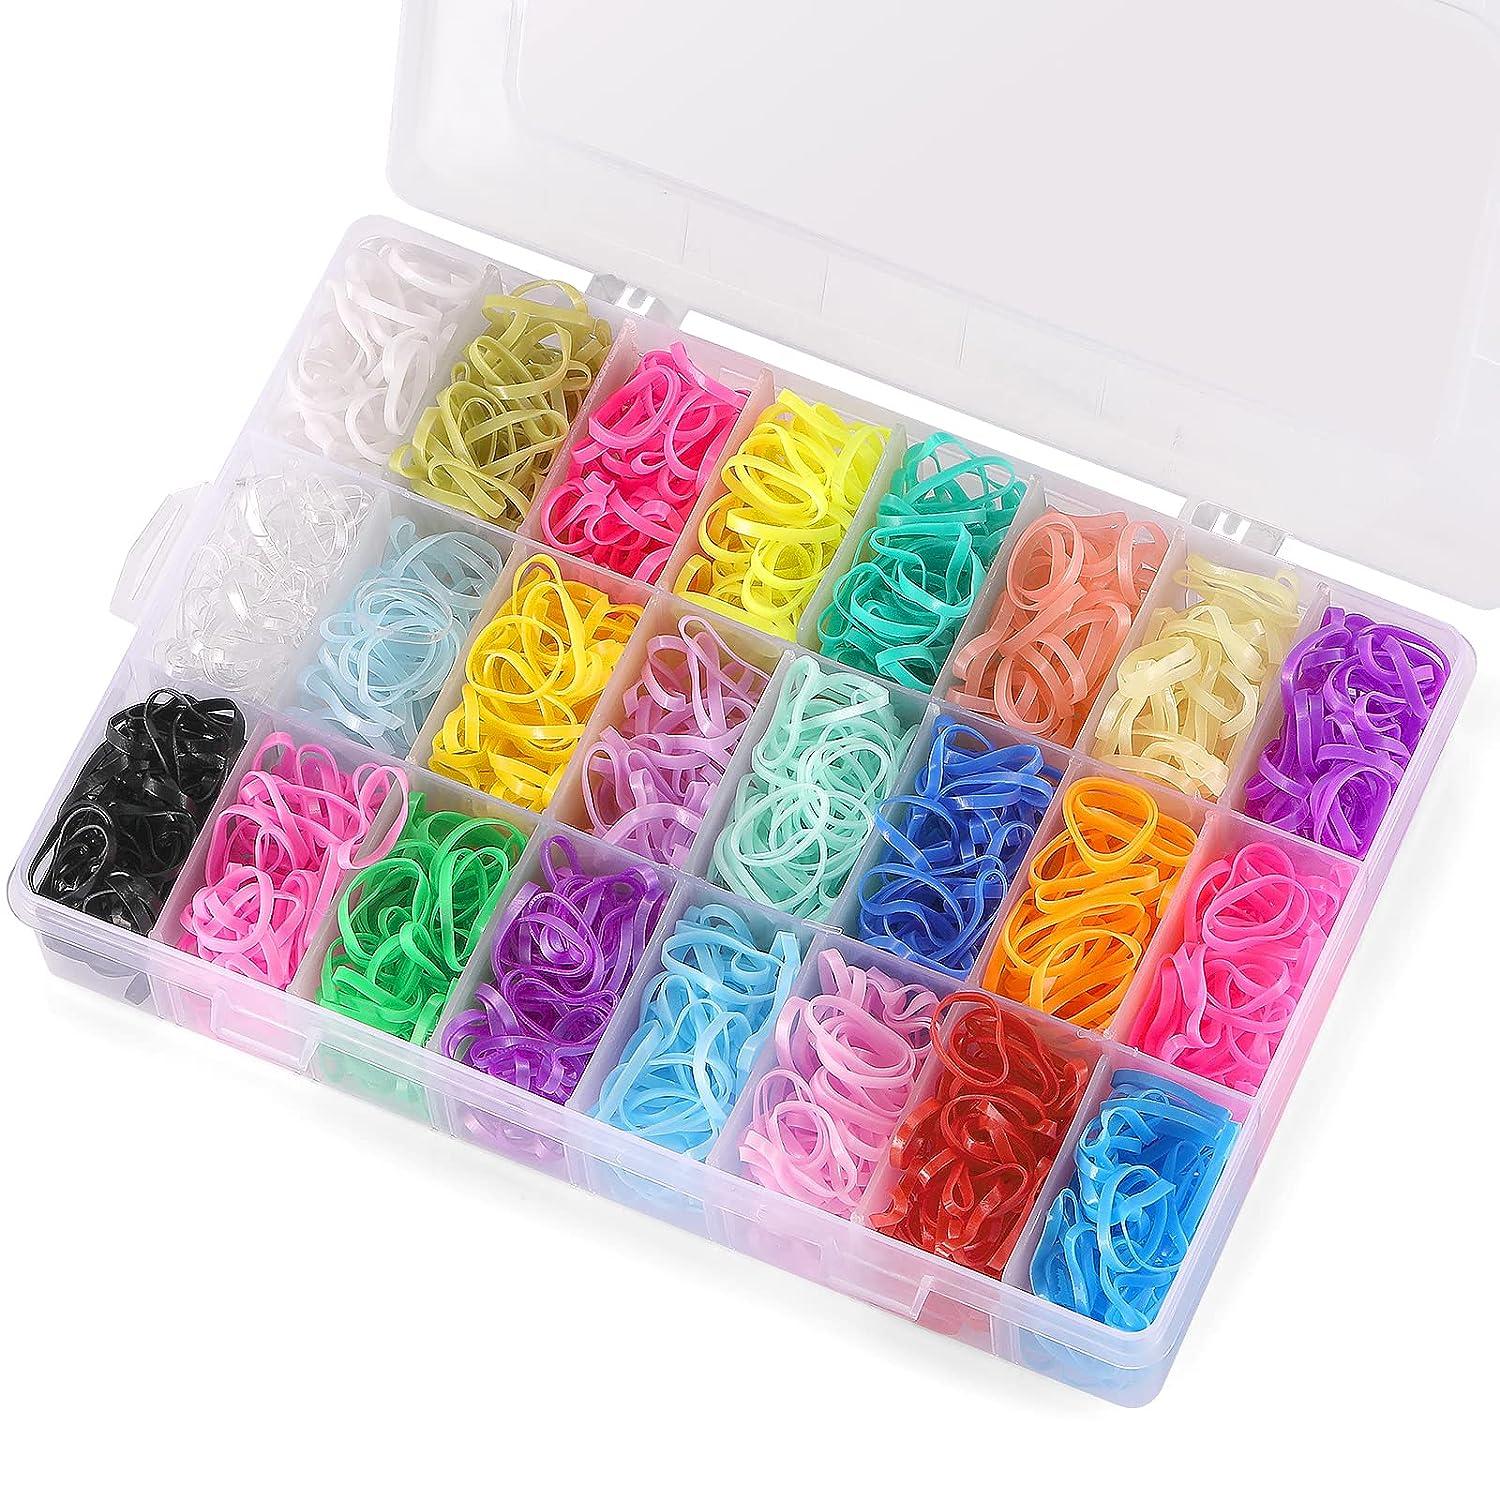 Bacofa Mini Small Rubber Bands,1600Pcs Hair Ties for Girls 24 Colors Elastic Hair Band with Organizer Box ,Soft Hair Rubber Bands for Kids Toddlers for